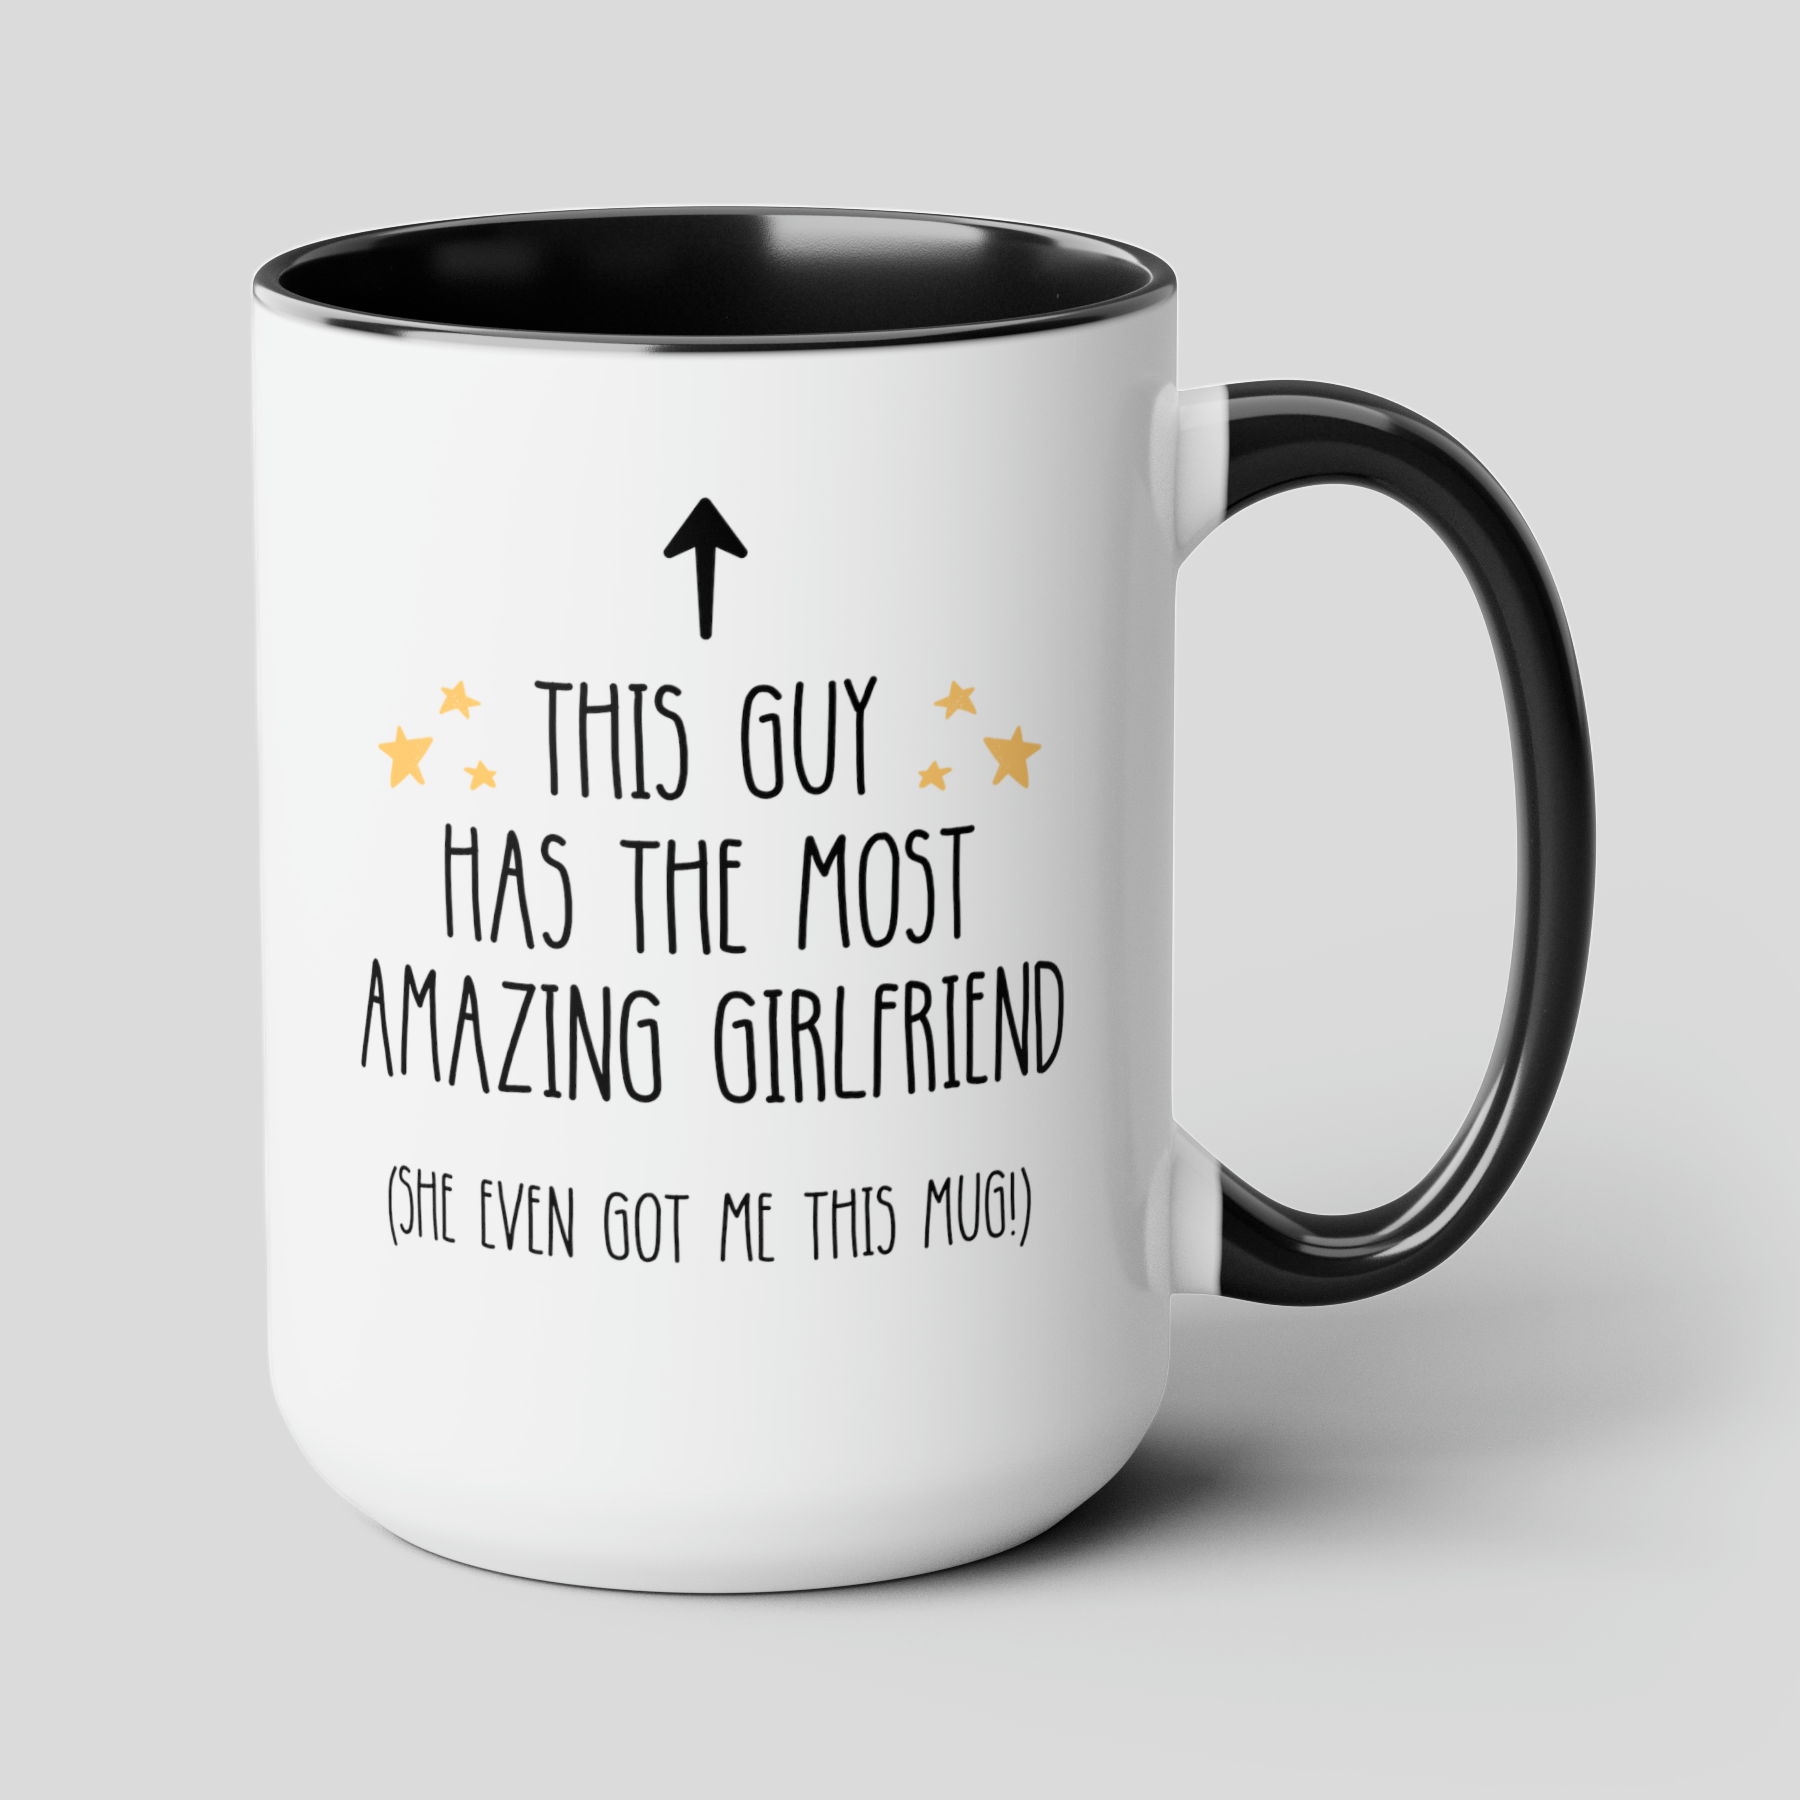 This Guy Has The Most Amazing Girlfriend 15oz white with black accent funny large coffee mug gift for boyfriend anniversary valentines him lover waveywares wavey wares wavywares wavy wares cover